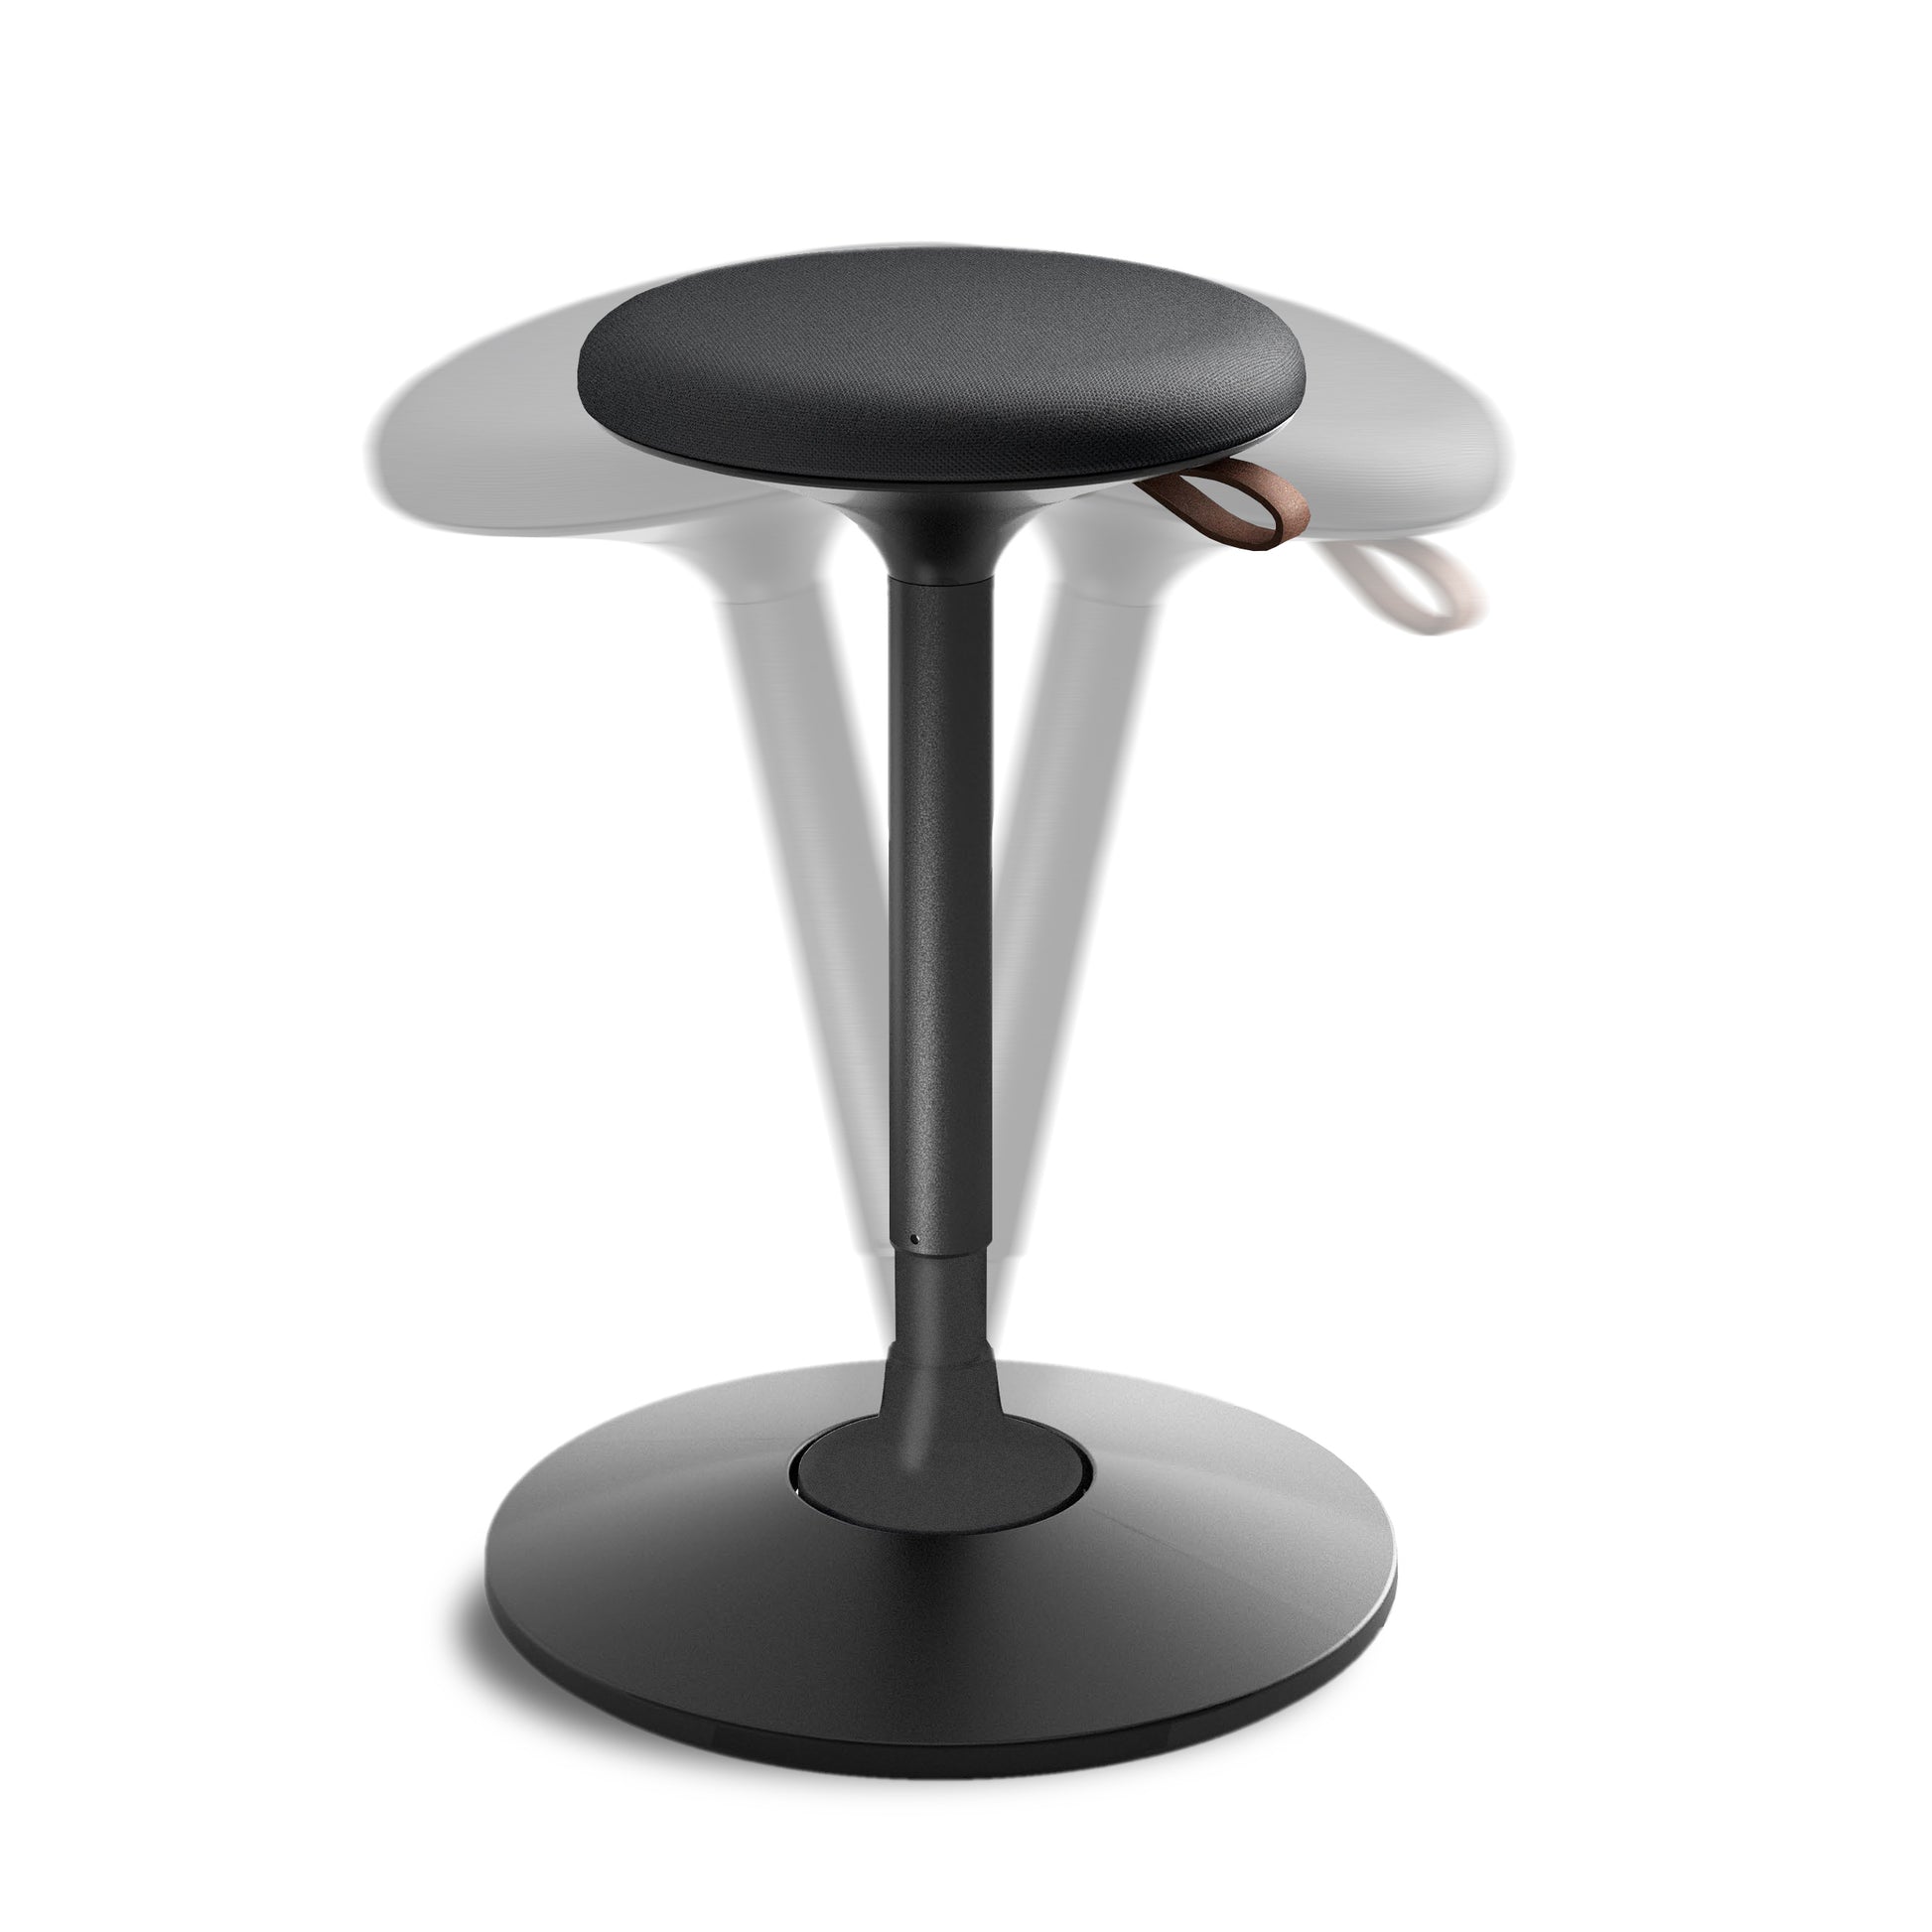 Cloonch Sit-Stand Stool in black